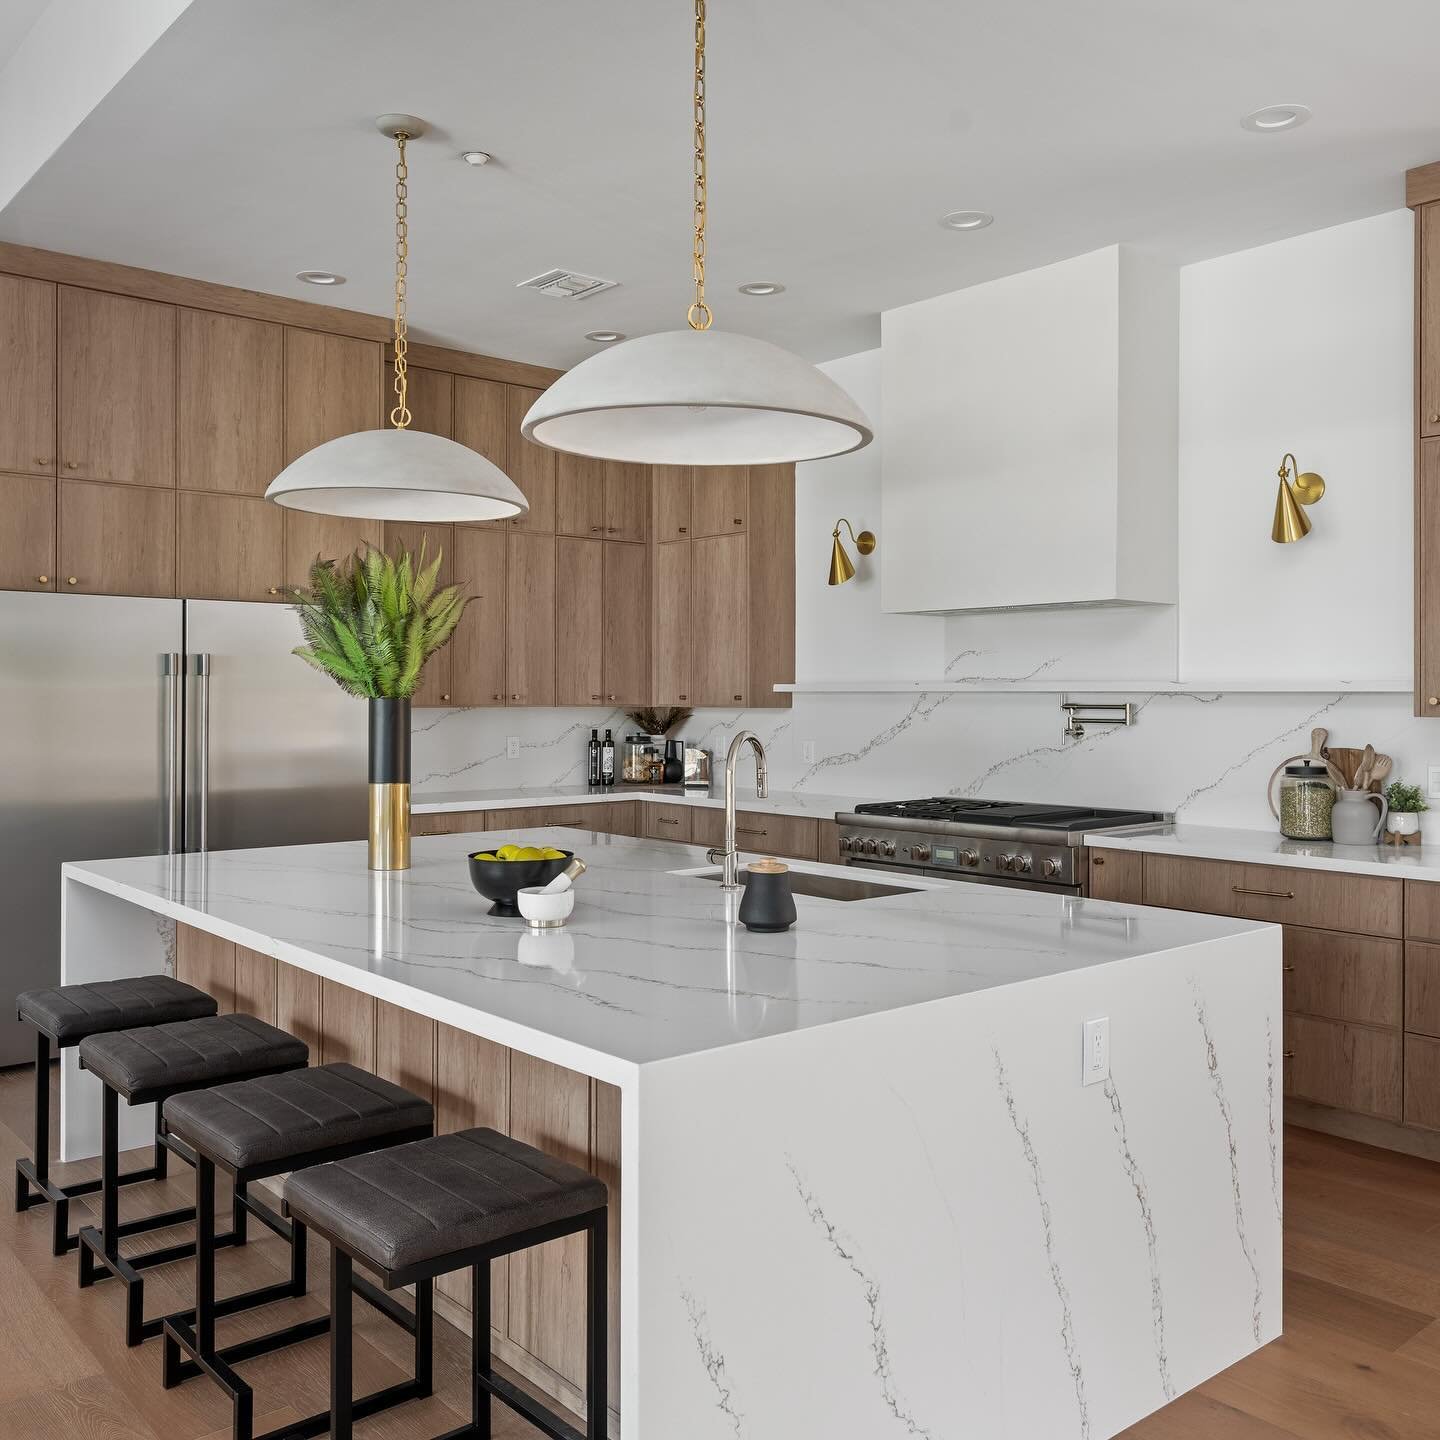 Loved designing this kitchen! We mixed textures &amp; metals to create an elevated &amp; modern space that&rsquo;s perfect for hosting 🩶
&bull;
&bull;
&bull;
&bull;
&bull;

#sketchdesignco #interiordesign #residential #remodel #fixerupper #design #i